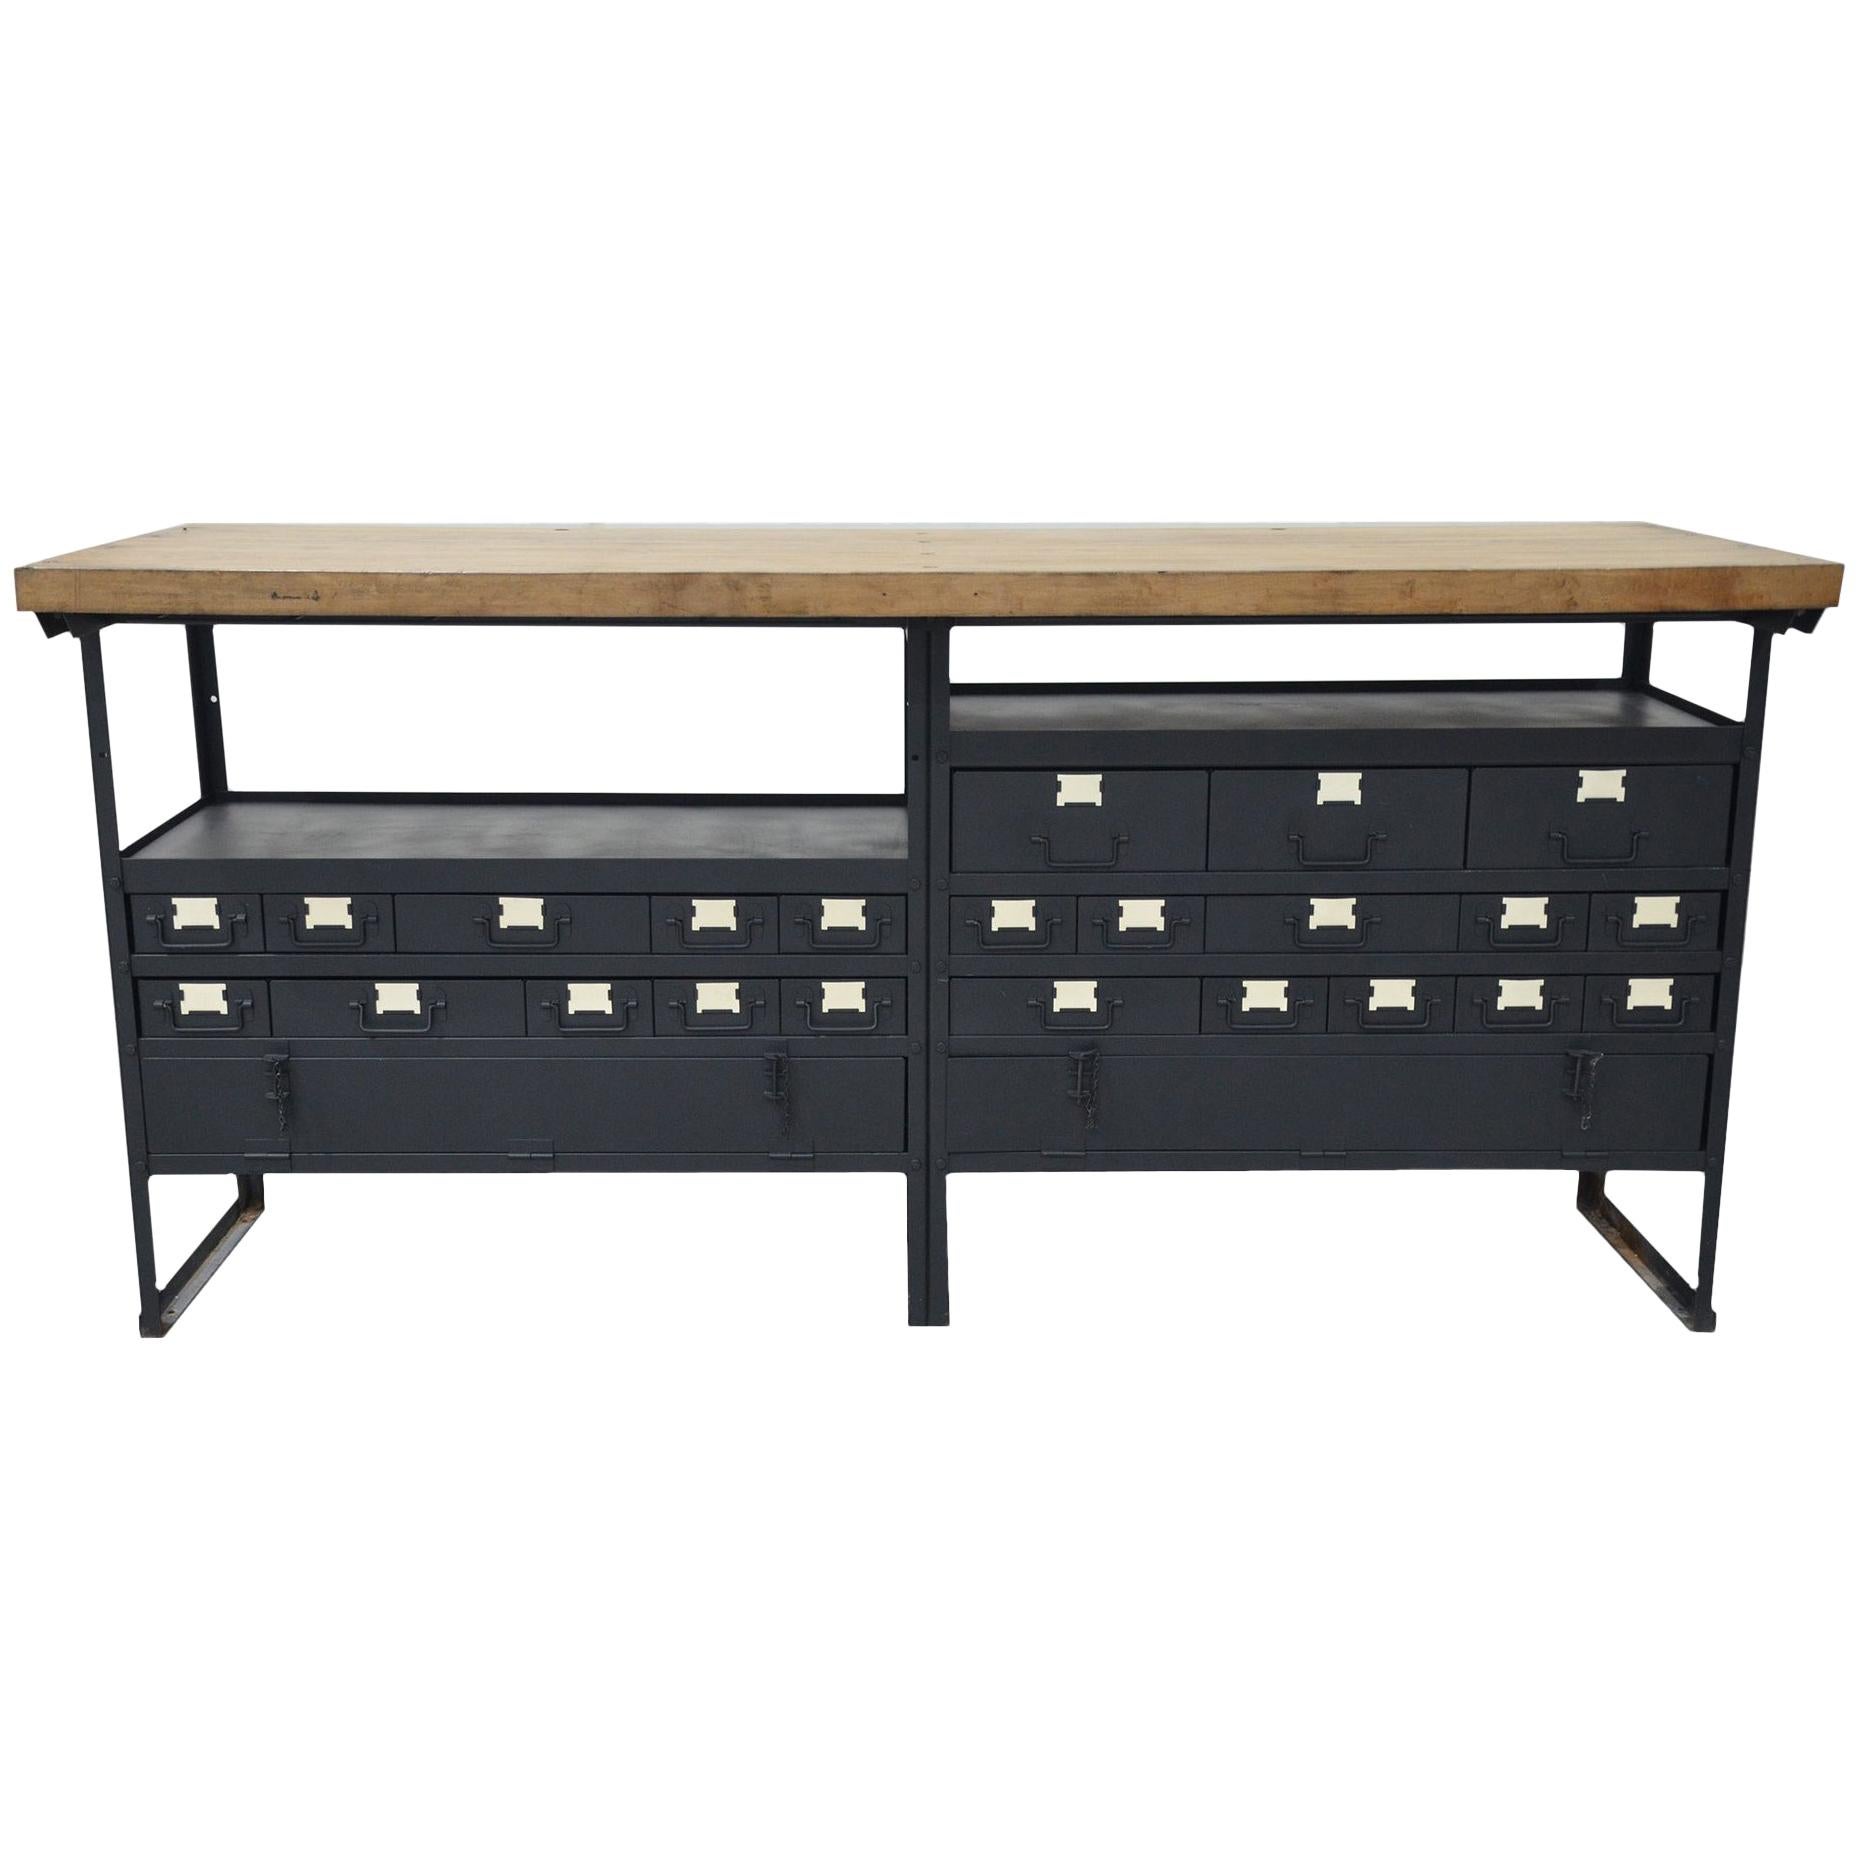 Industrial Work Table/Island with Drawers and Maple Wood Butcher Block Top For Sale